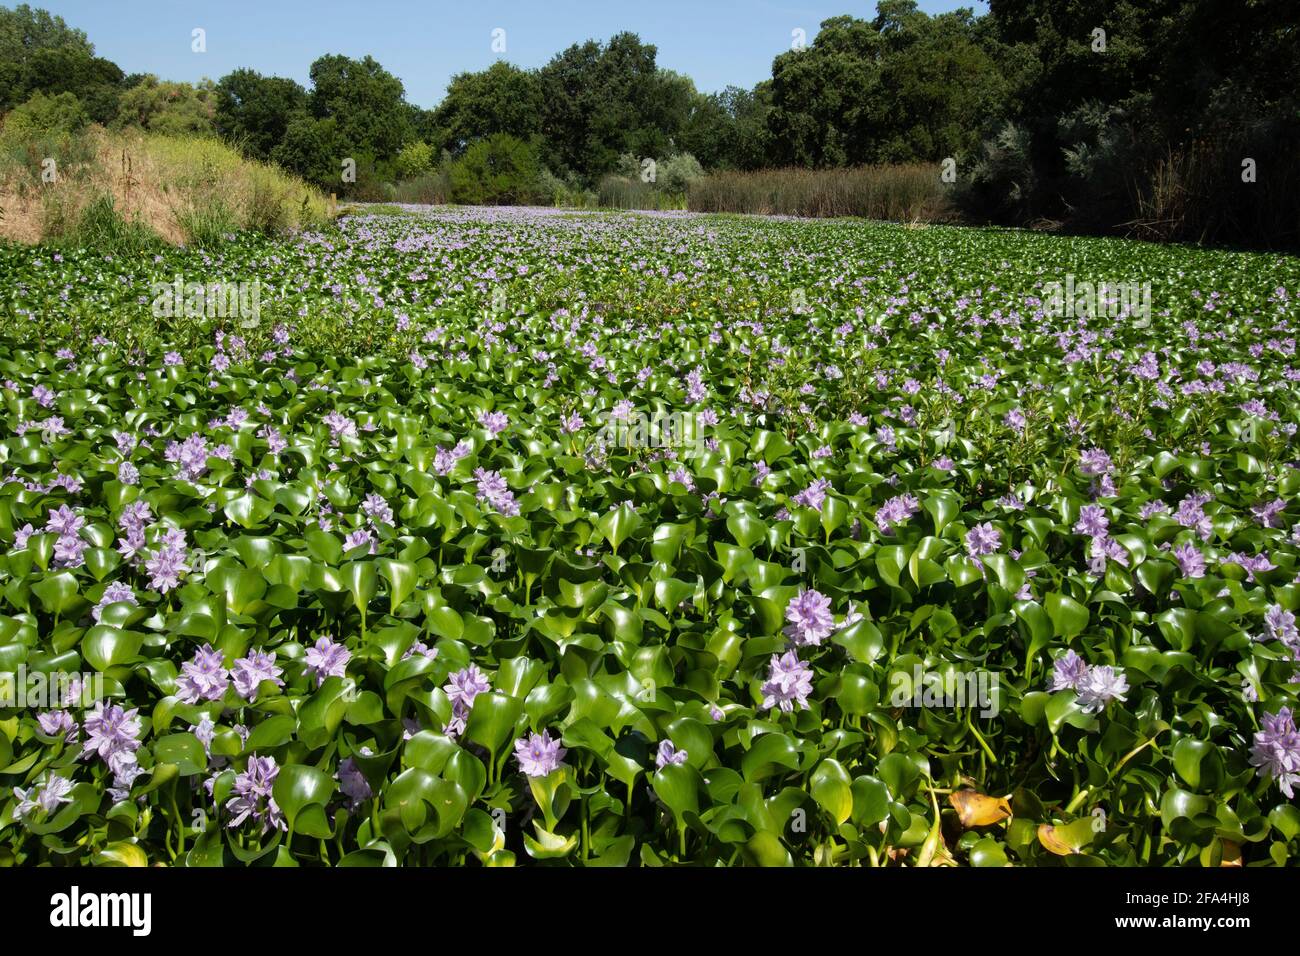 Water hyacinth, Eichhornia crassipes, invasive floating plant, chokes natural slough channel, San Joaquin Valley, Stanislaus County, California Stock Photo